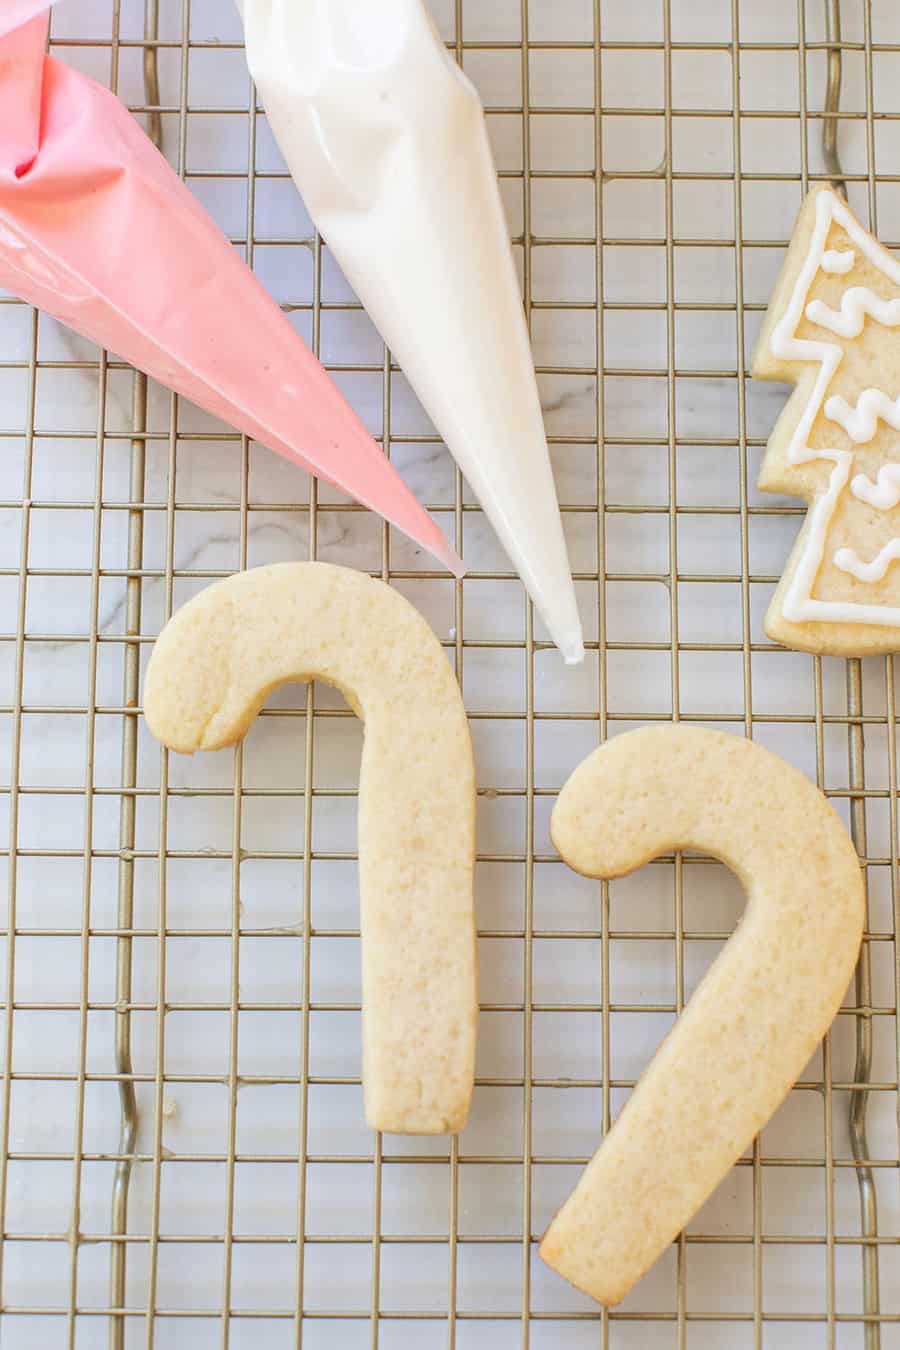 Candy cane sugar cookies that are made with Truvia sweetener and are sugar-free.